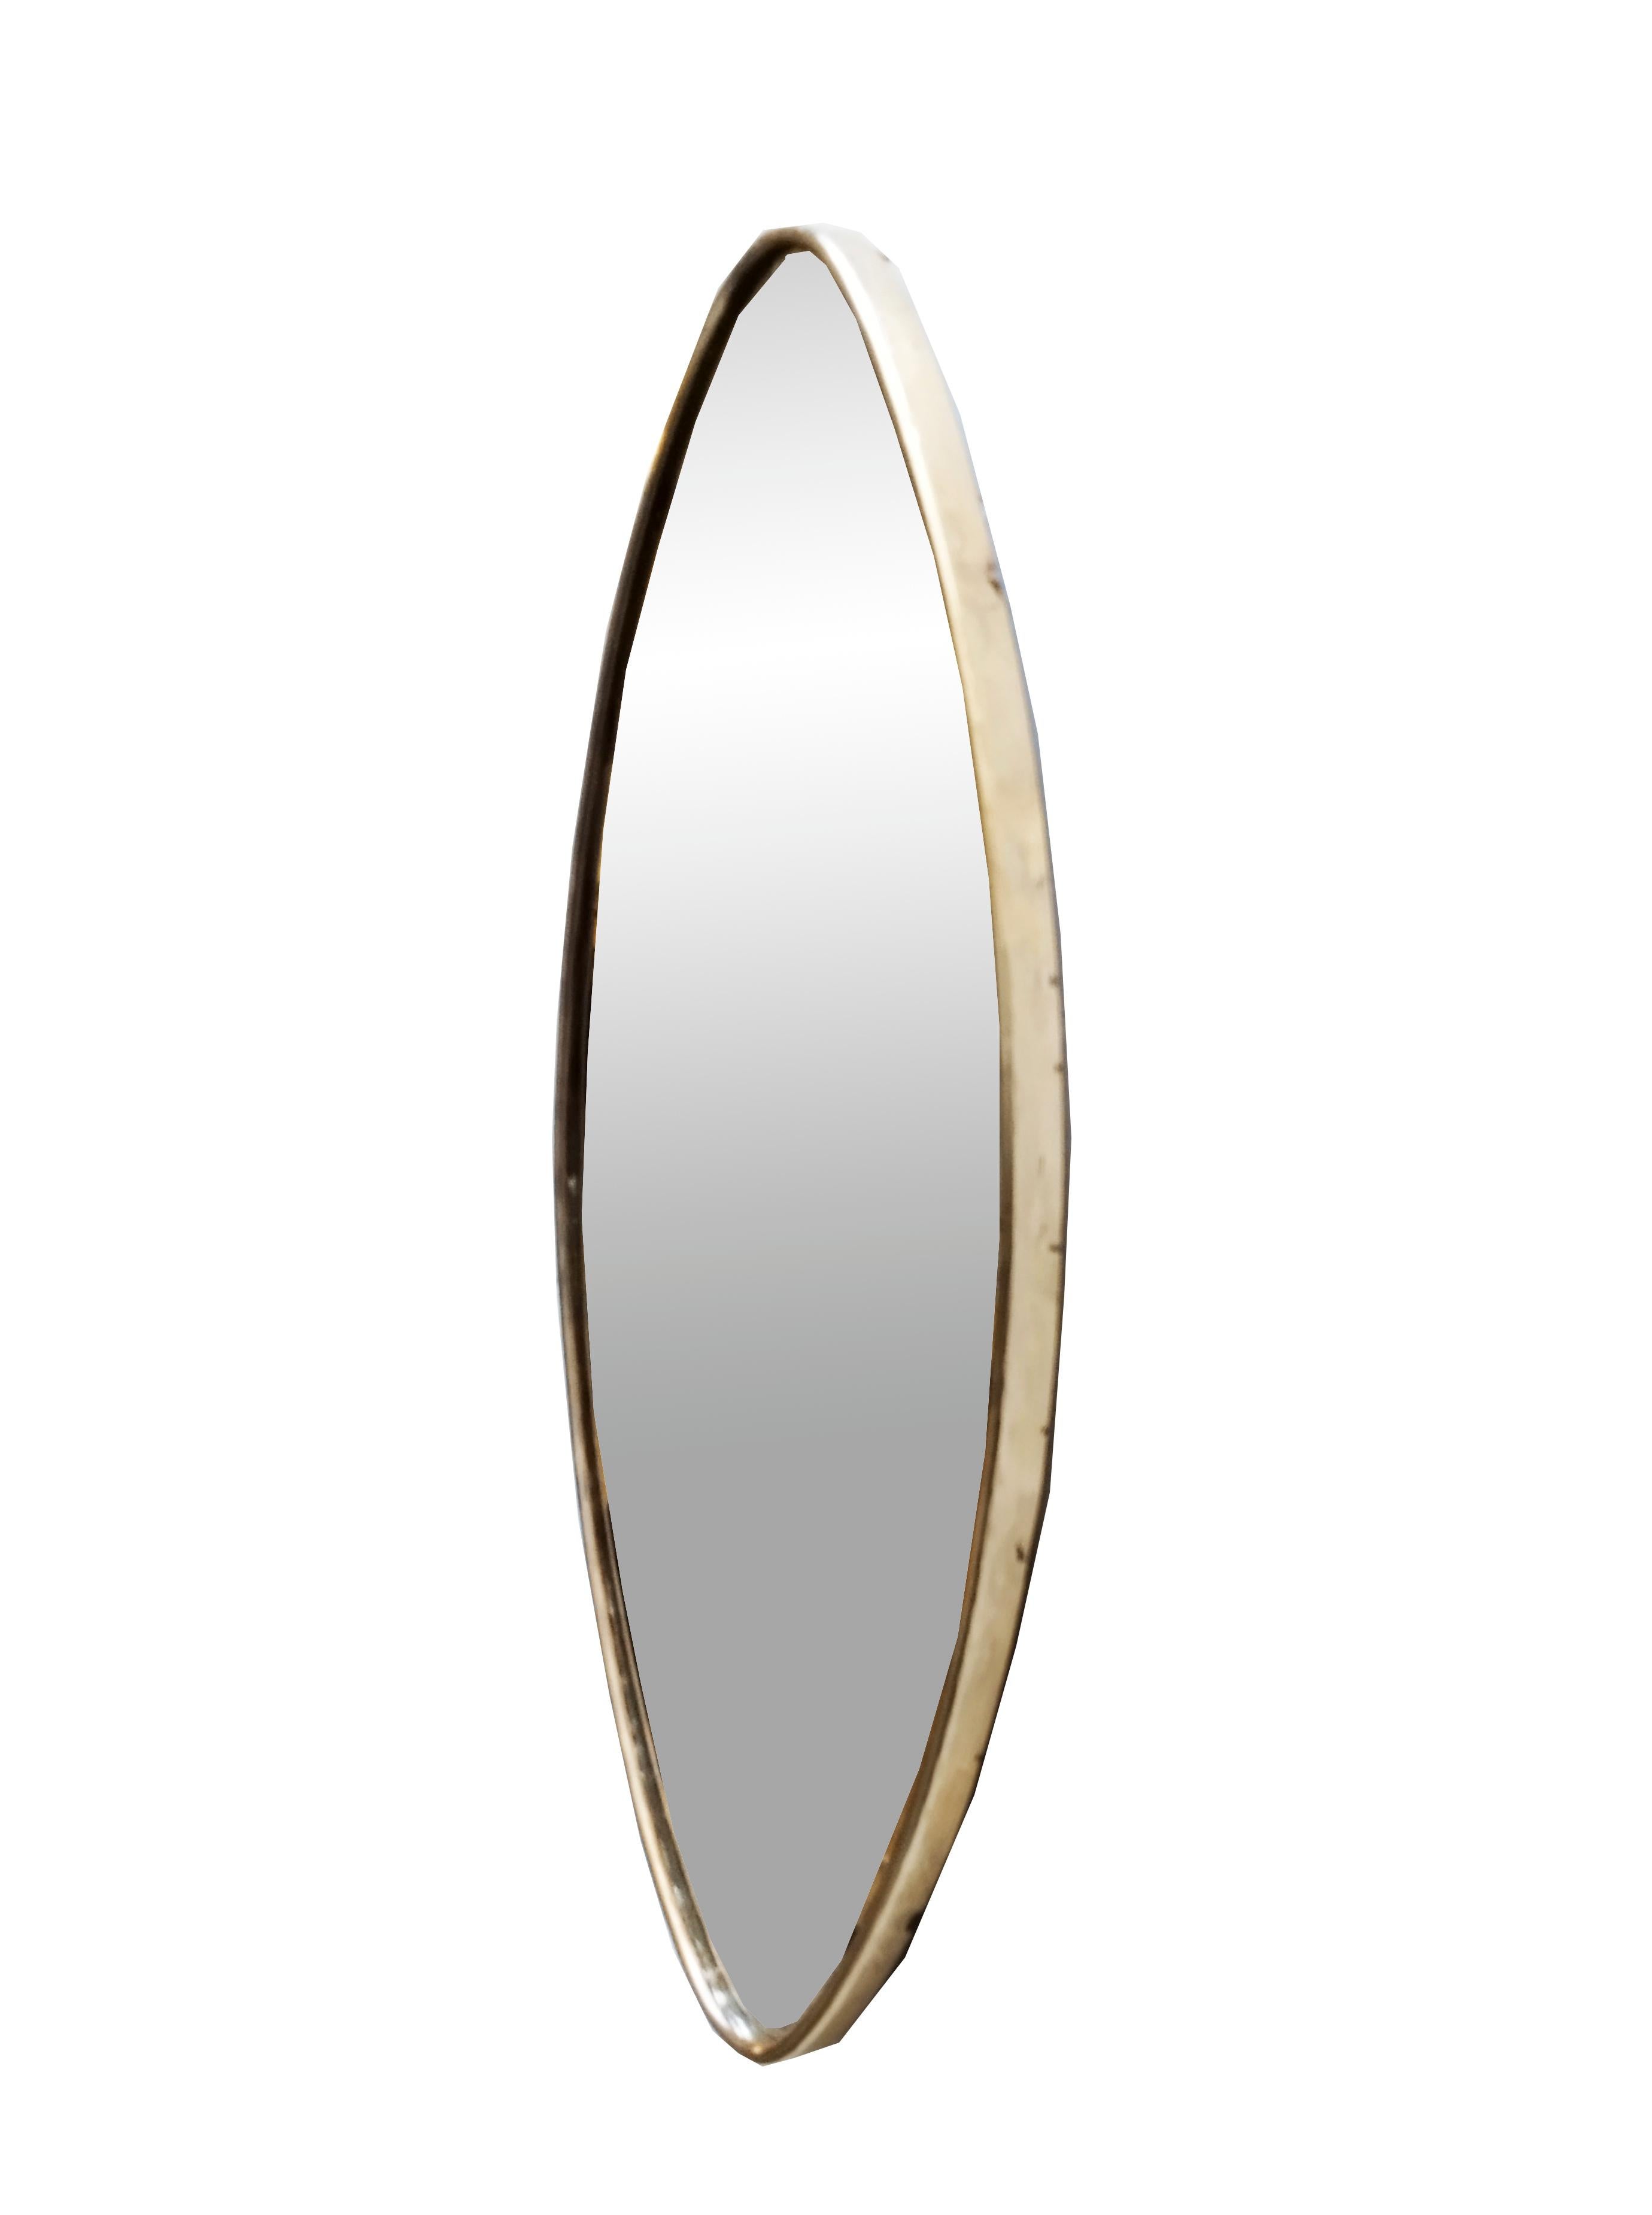 Small brass, glass and wood wall mirror, Italian production from the 1950s.
Good condition with slight signs of time.